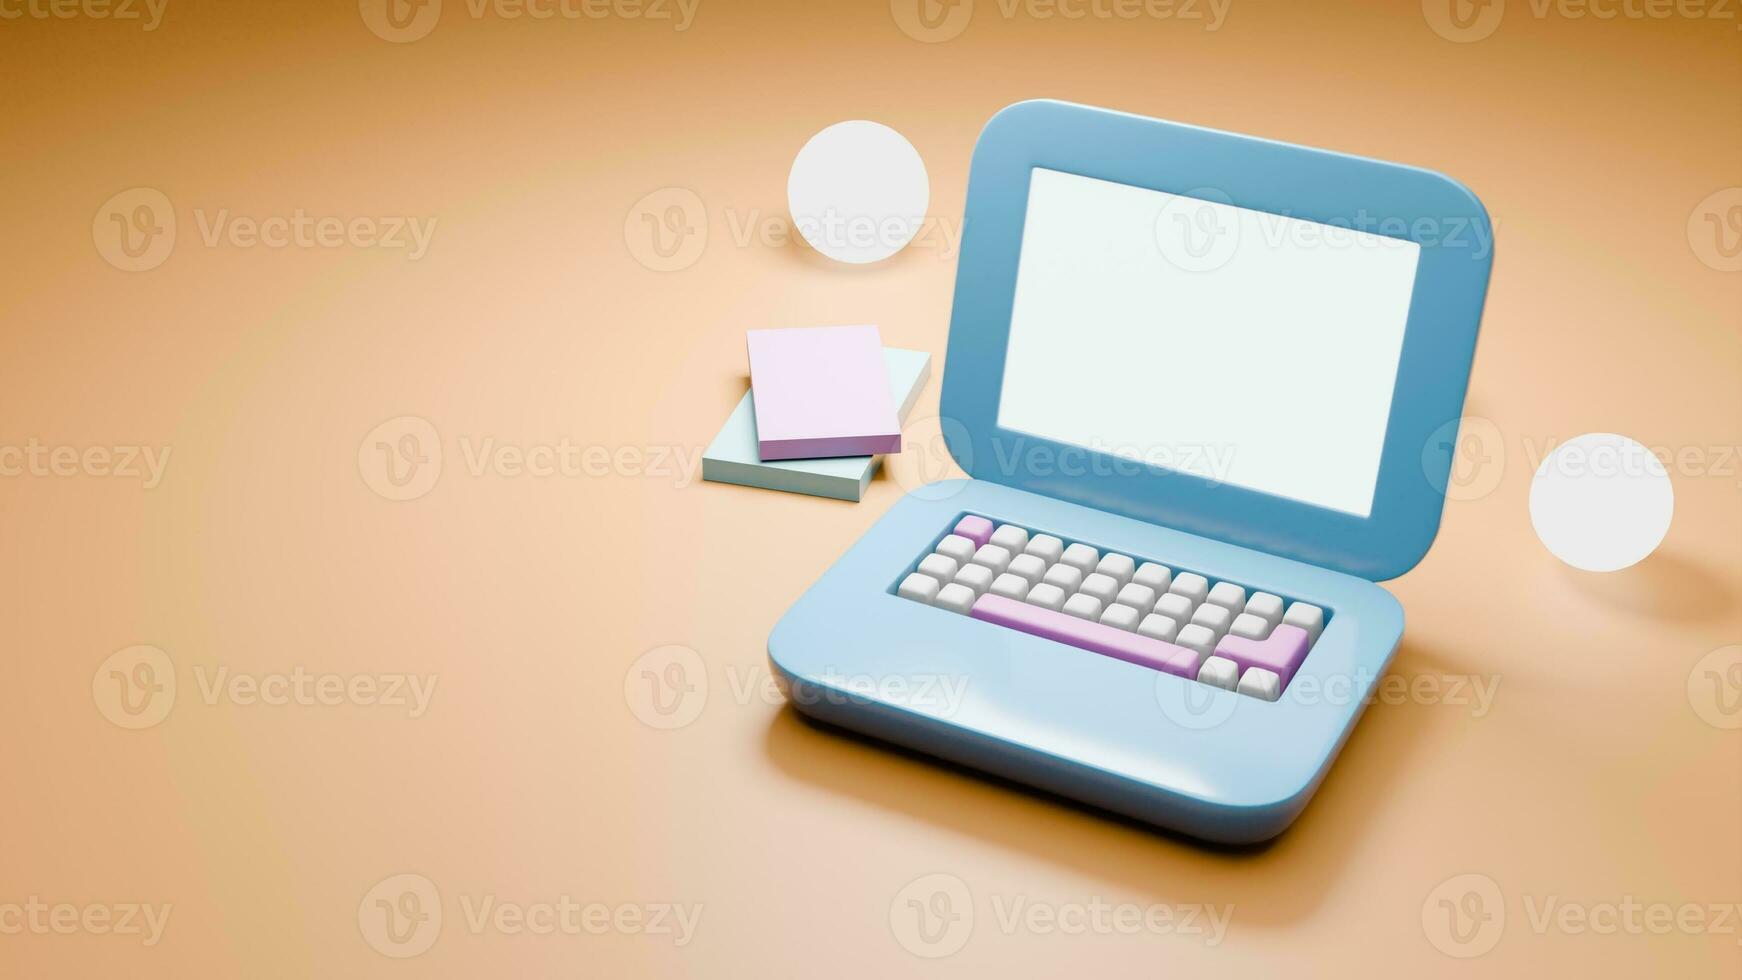 Cute 3d render of laptop and book on table background. photo